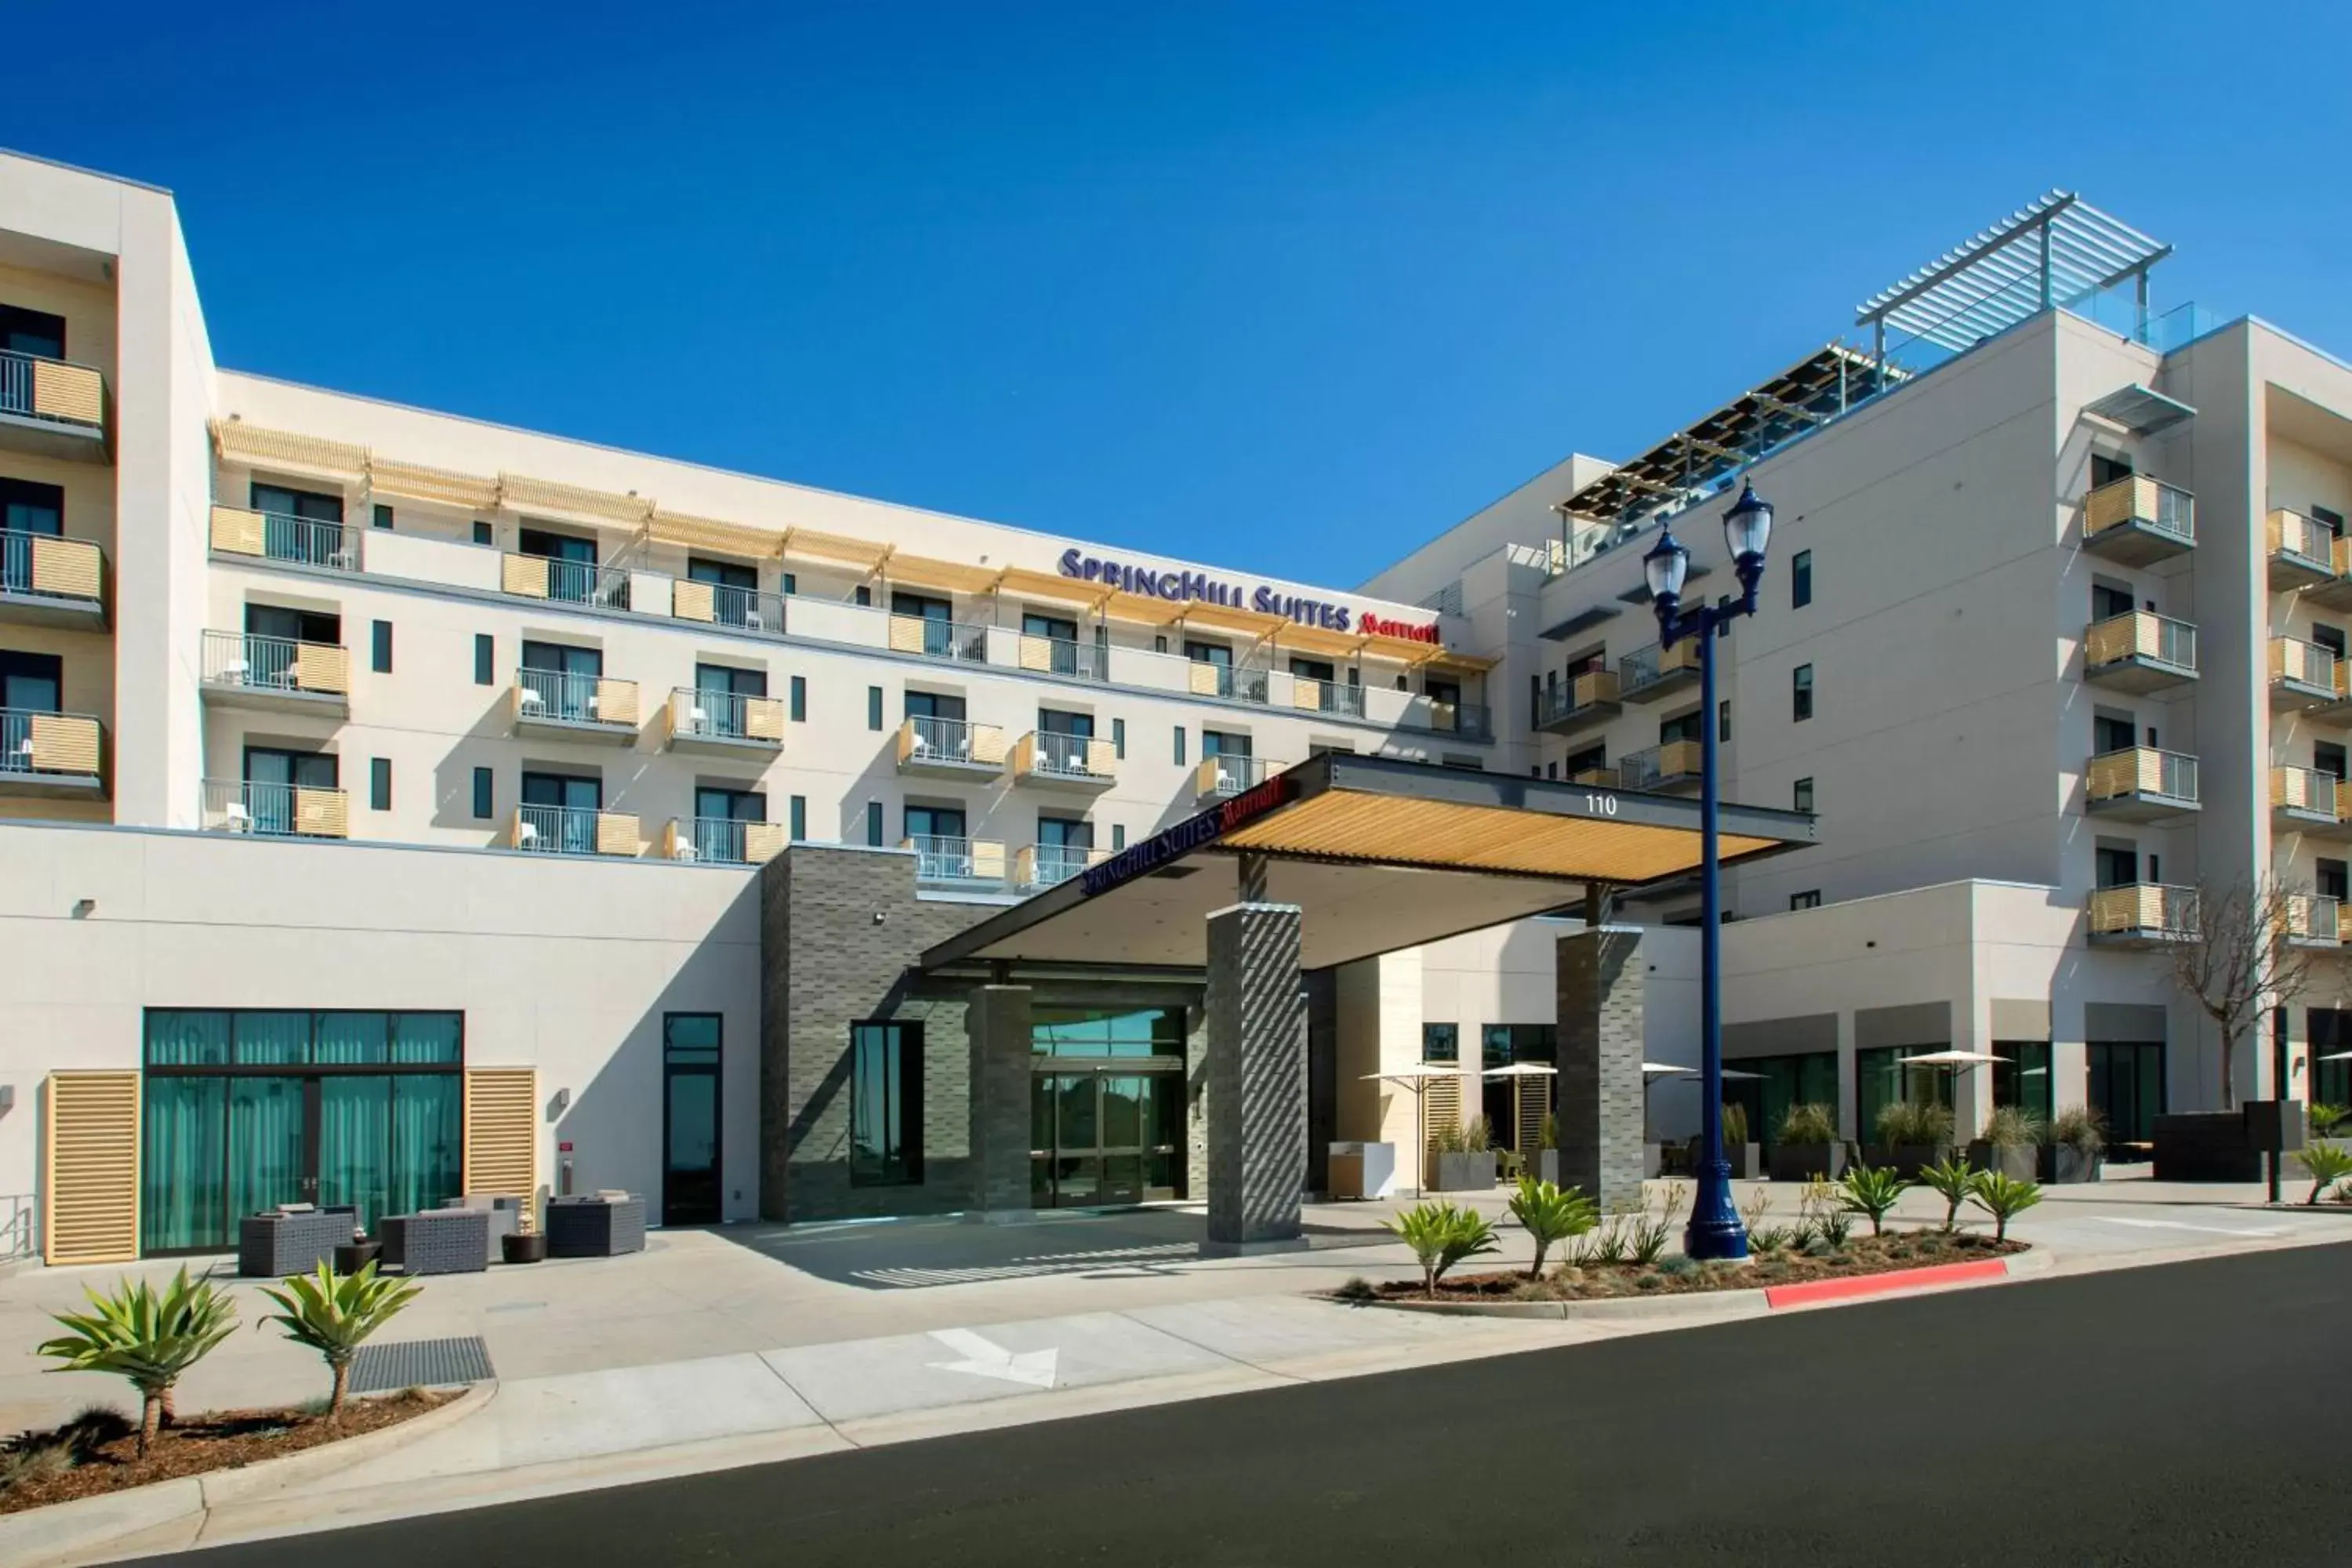 Property Building in SpringHill Suites by Marriott San Diego Oceanside/Downtown